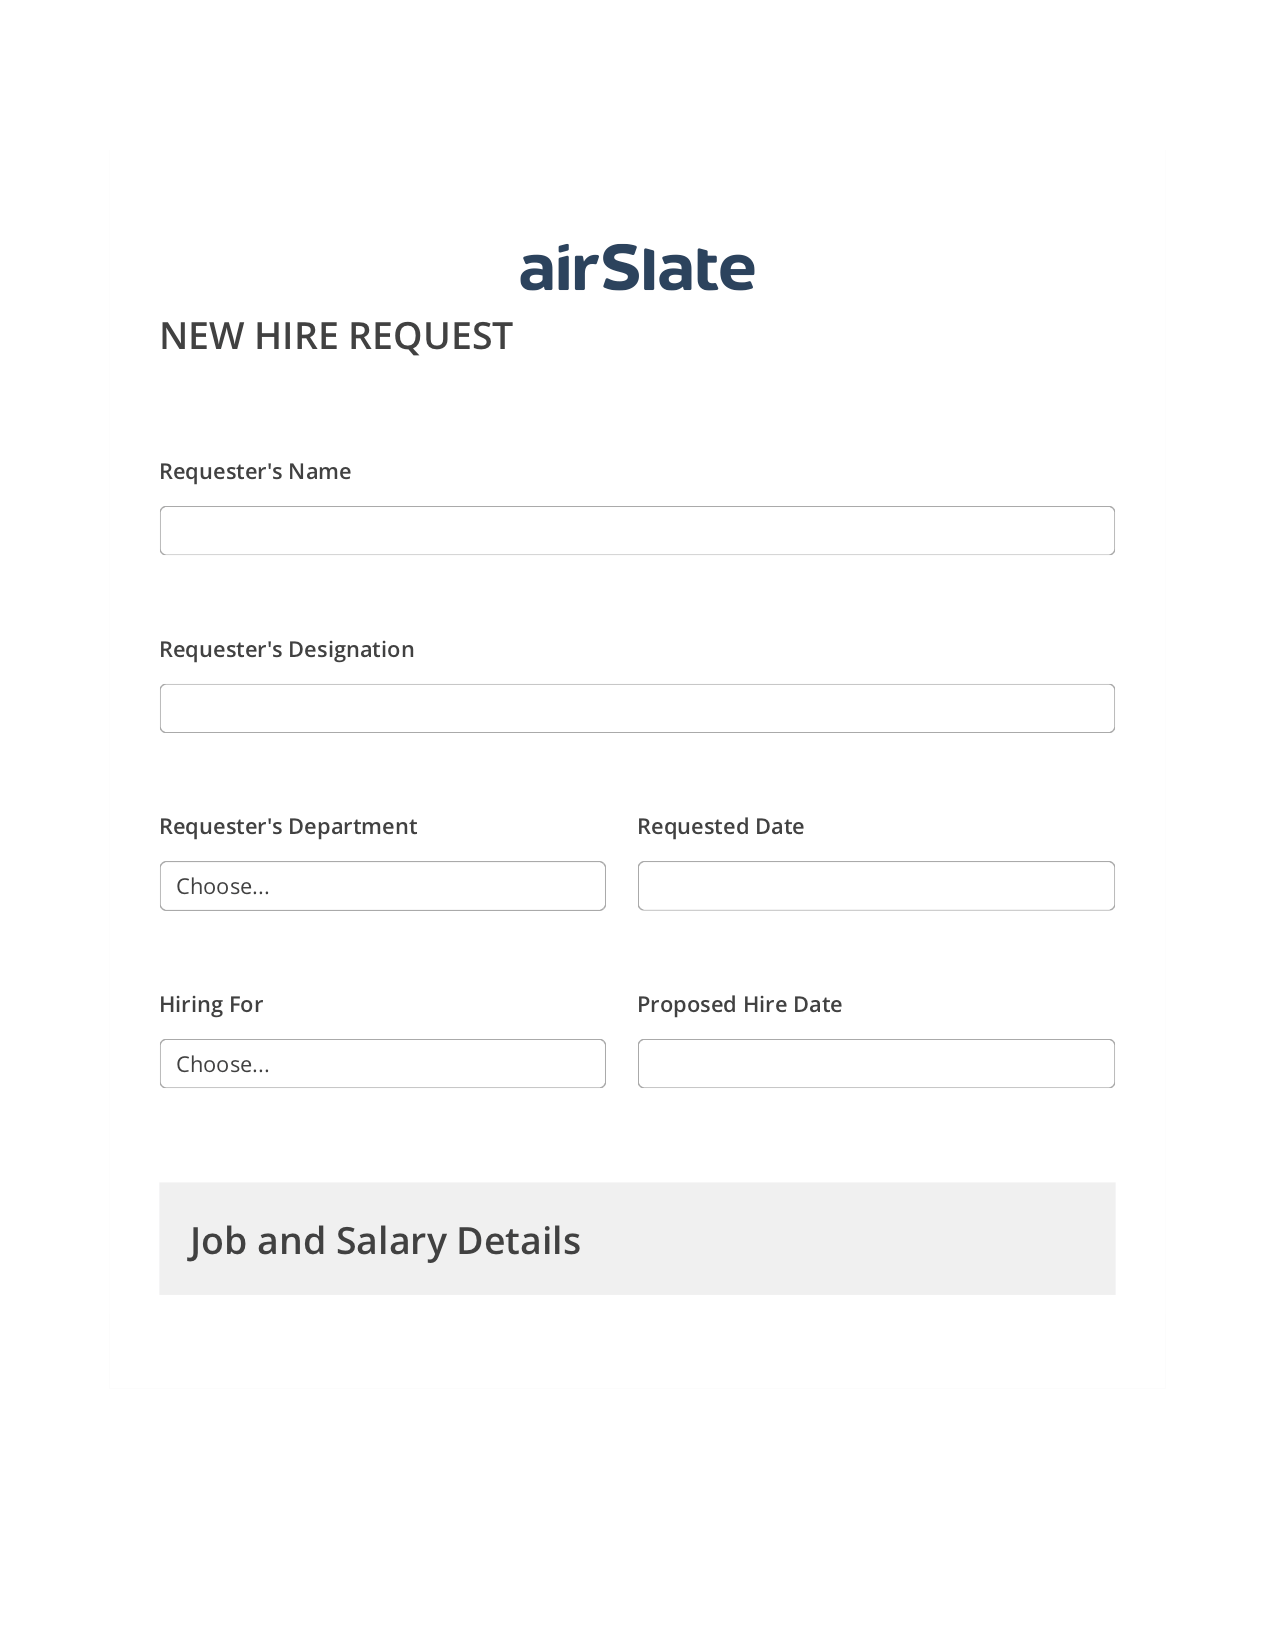 Hiring Request Workflow Pre-fill Dropdowns from Excel Bot, SendGrid send Campaign bot, Text Message Notification Postfinish Bot